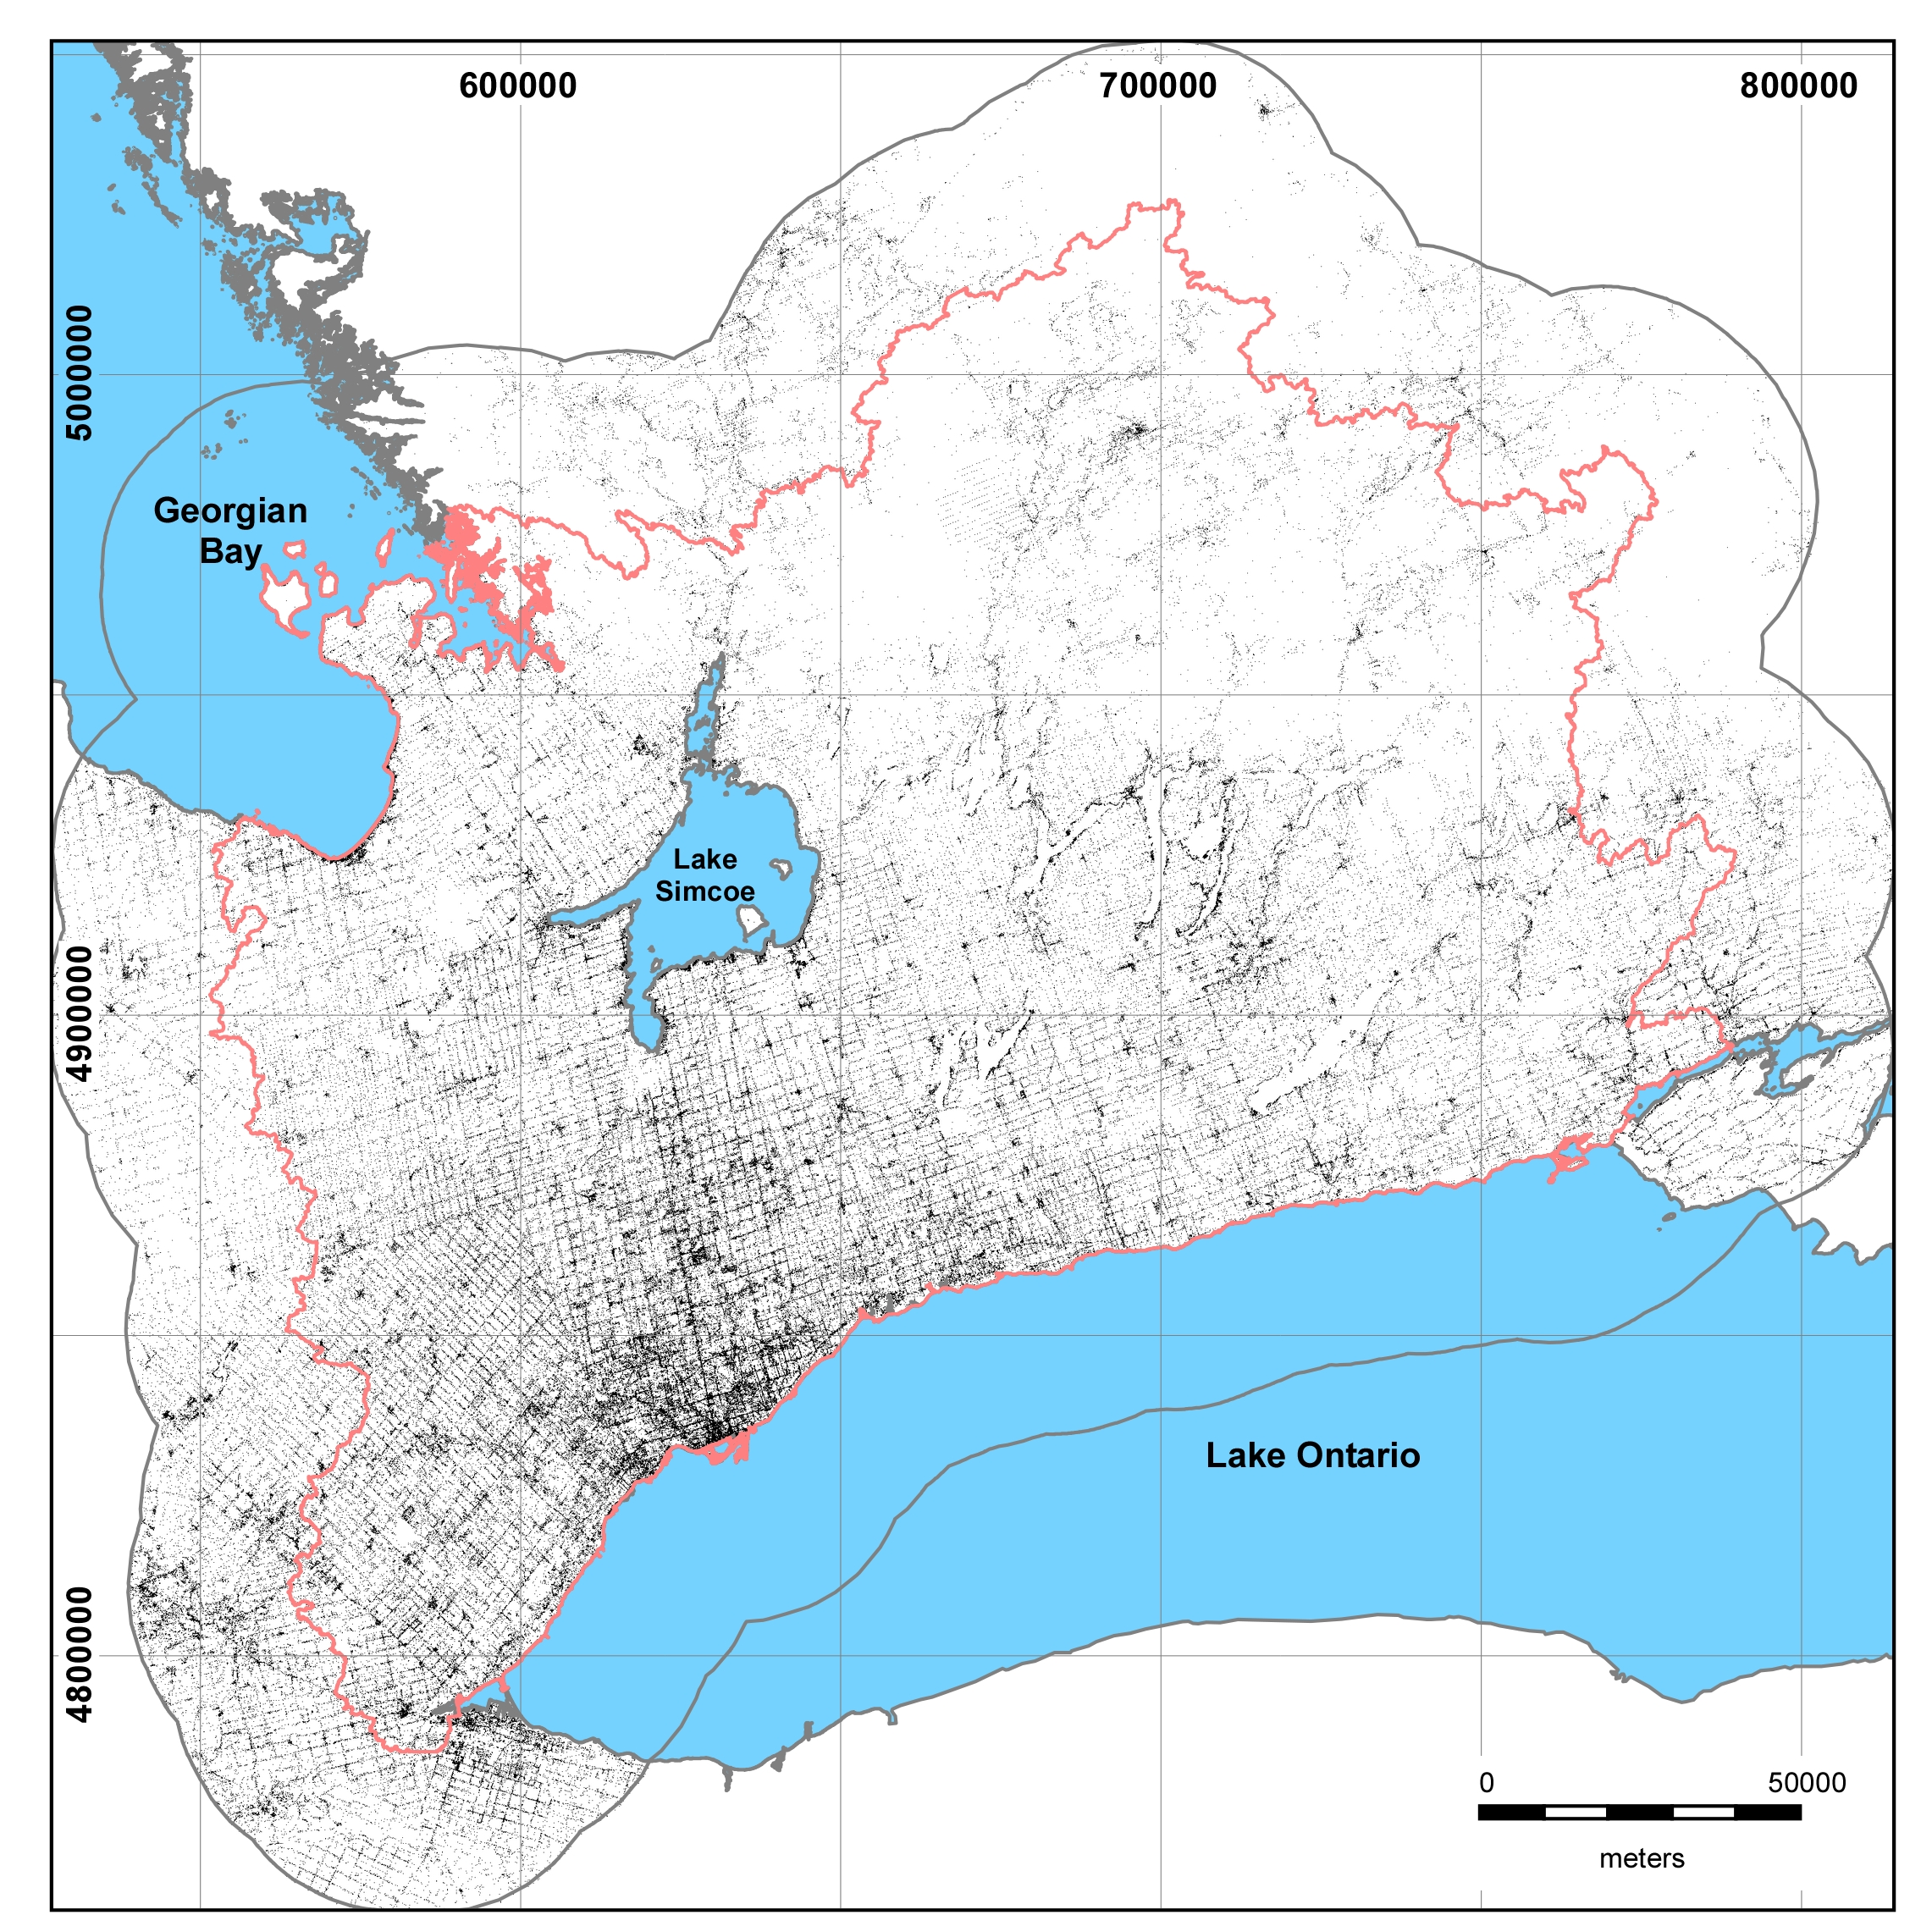 *Figure 1.3.1 The spatial extents of the study area showing locations
(boreholes, climate stations, surface water stations, reports, etc.) currently
residing in the database.*